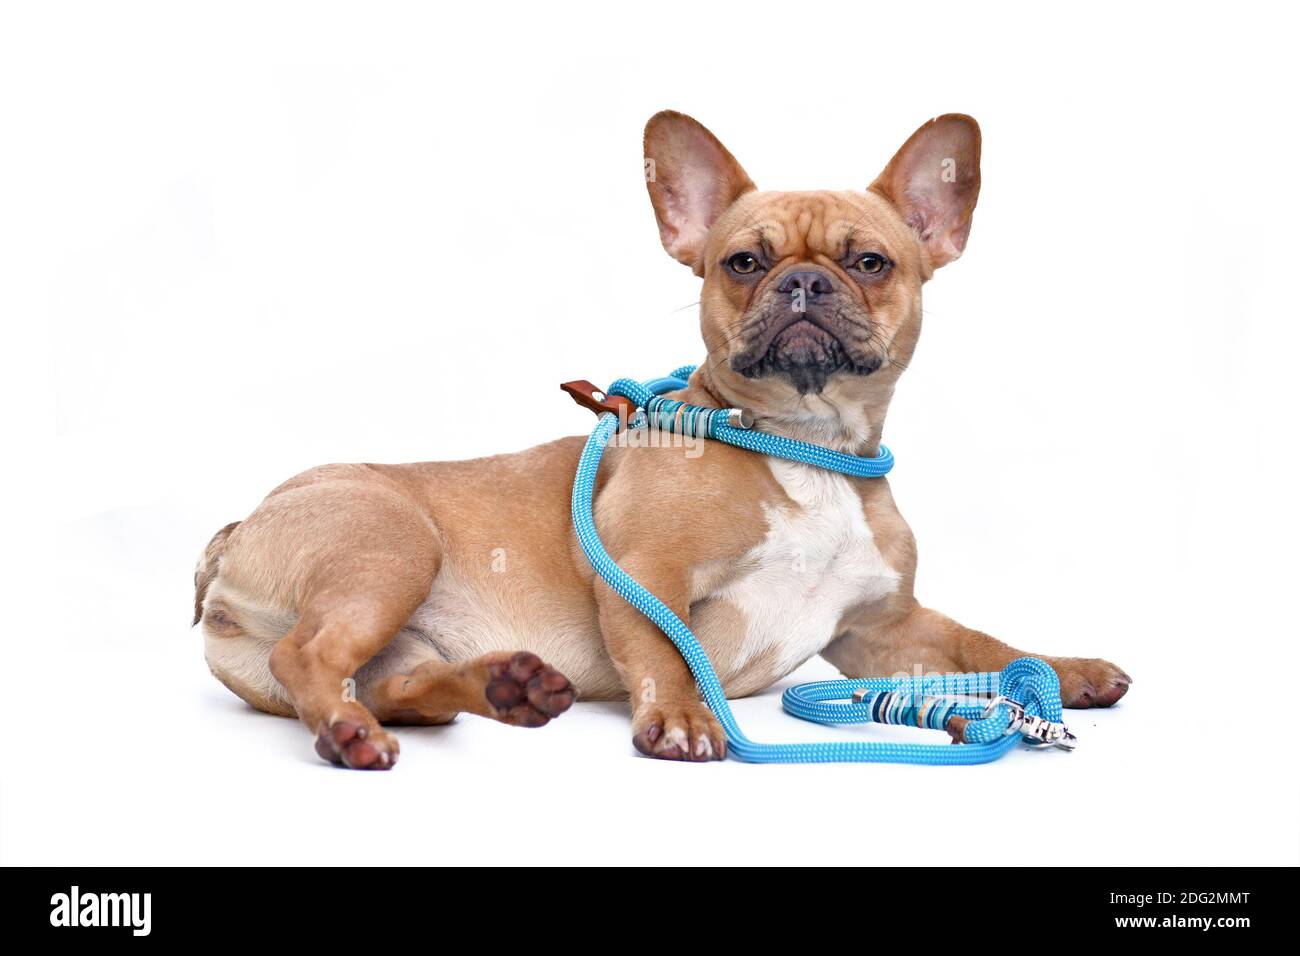 Dog modelling collar and leash set. A fawn colored French Bulldog wearing a teal retriever rope leash set while lying down isolated on white backgroun Stock Photo